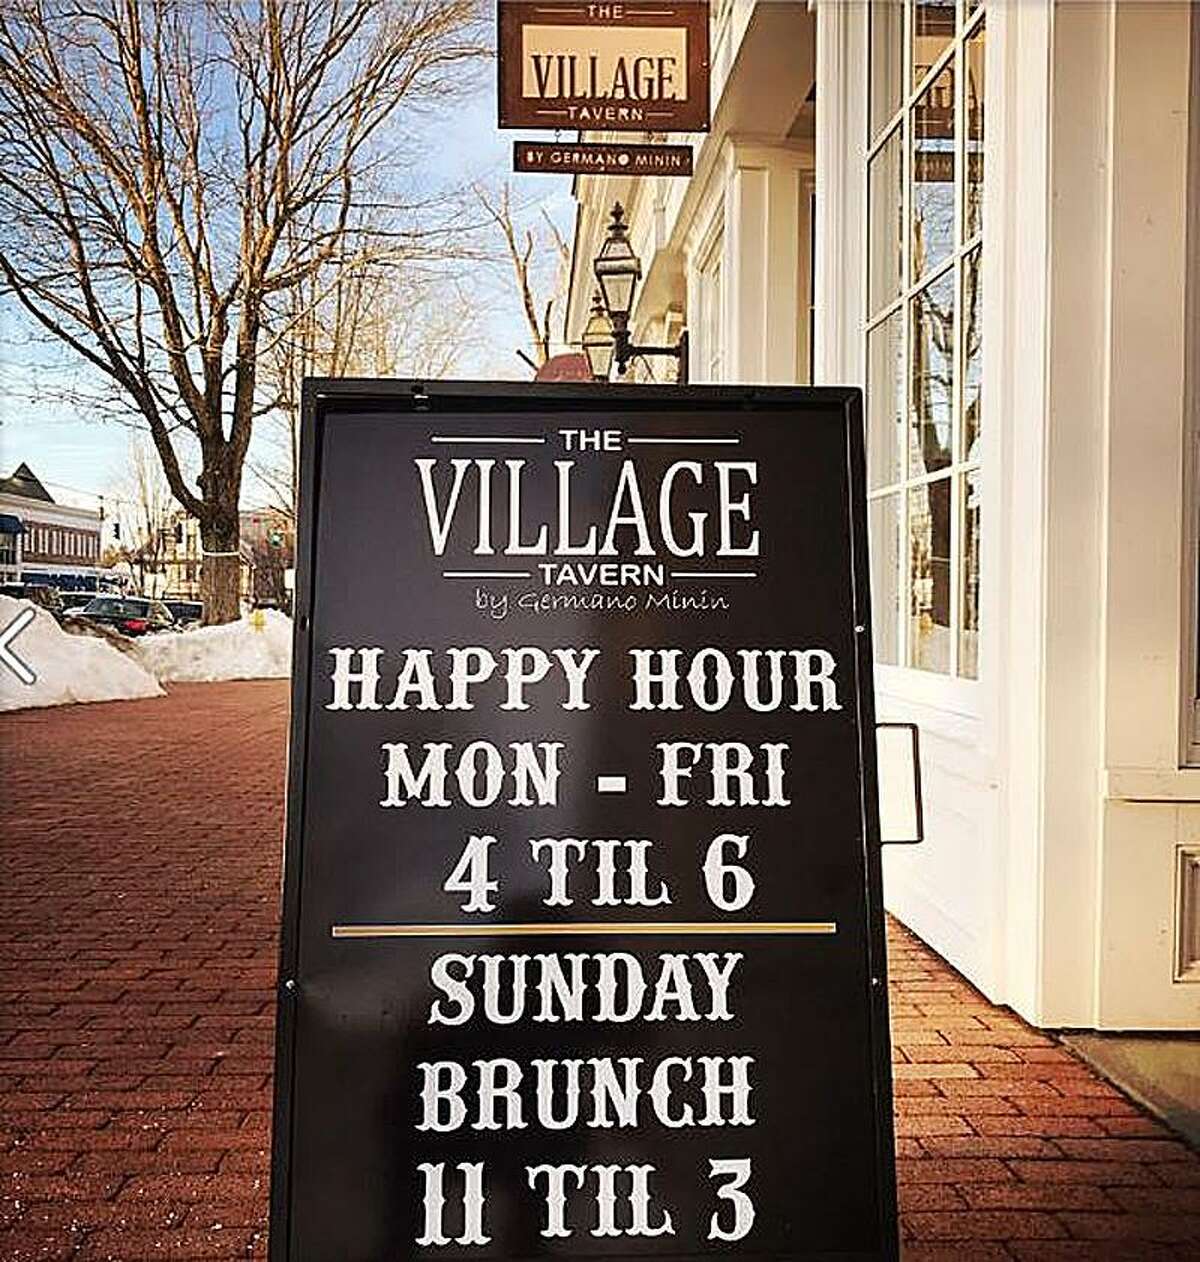 The Village Tavern, Ridgefield Opened January 2017 Celebrity Chef Bruno DiFabio, along with chef Germano Minin, opened The Village Tavern in January. DiFabio described the cuisine as “new American kissed by an Italian chef.” Read more.